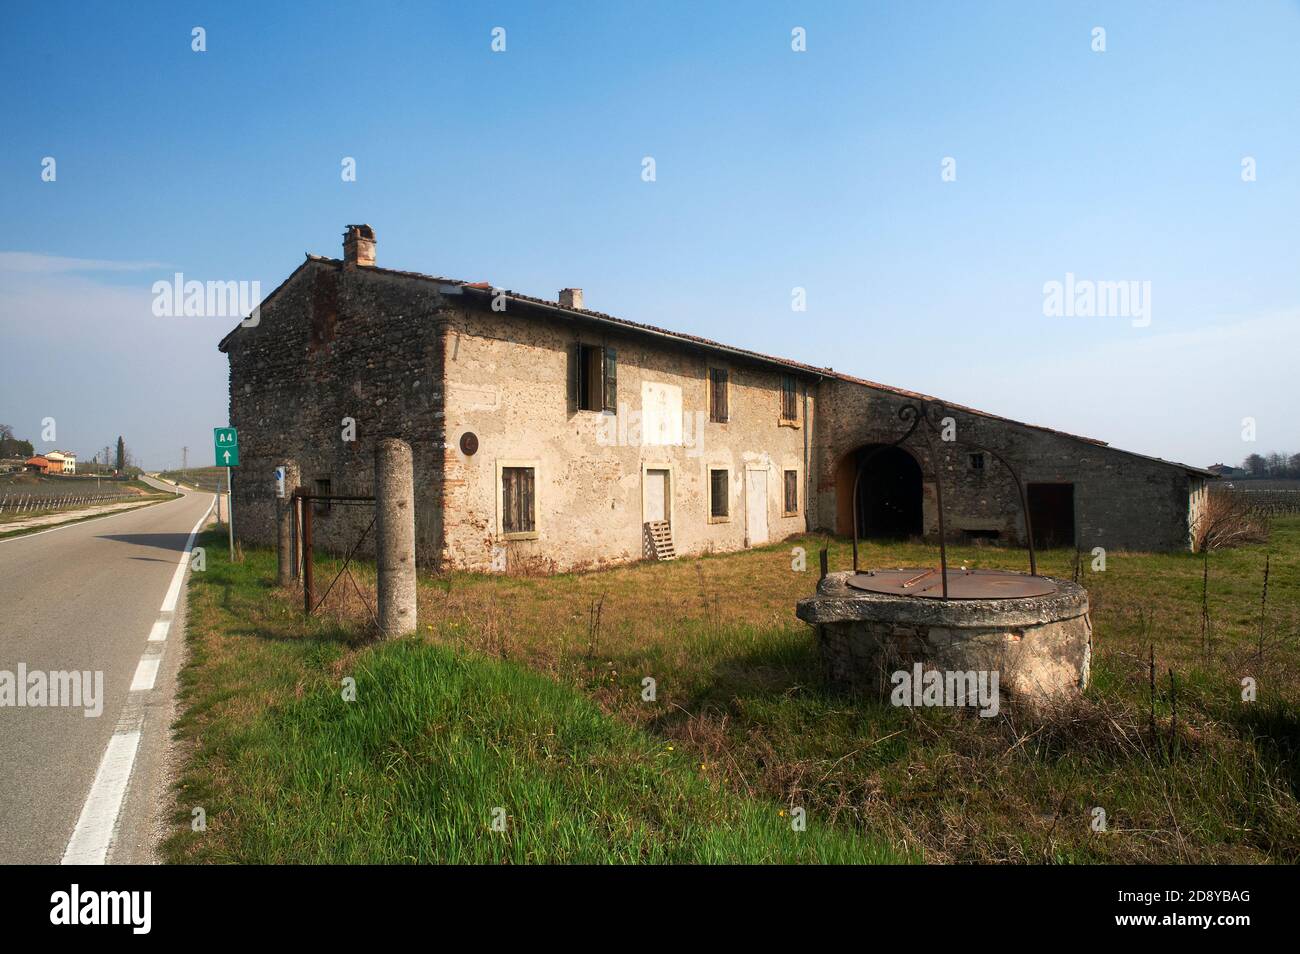 Custoza (Vr), Italy, an old farm building with a well Stock Photo